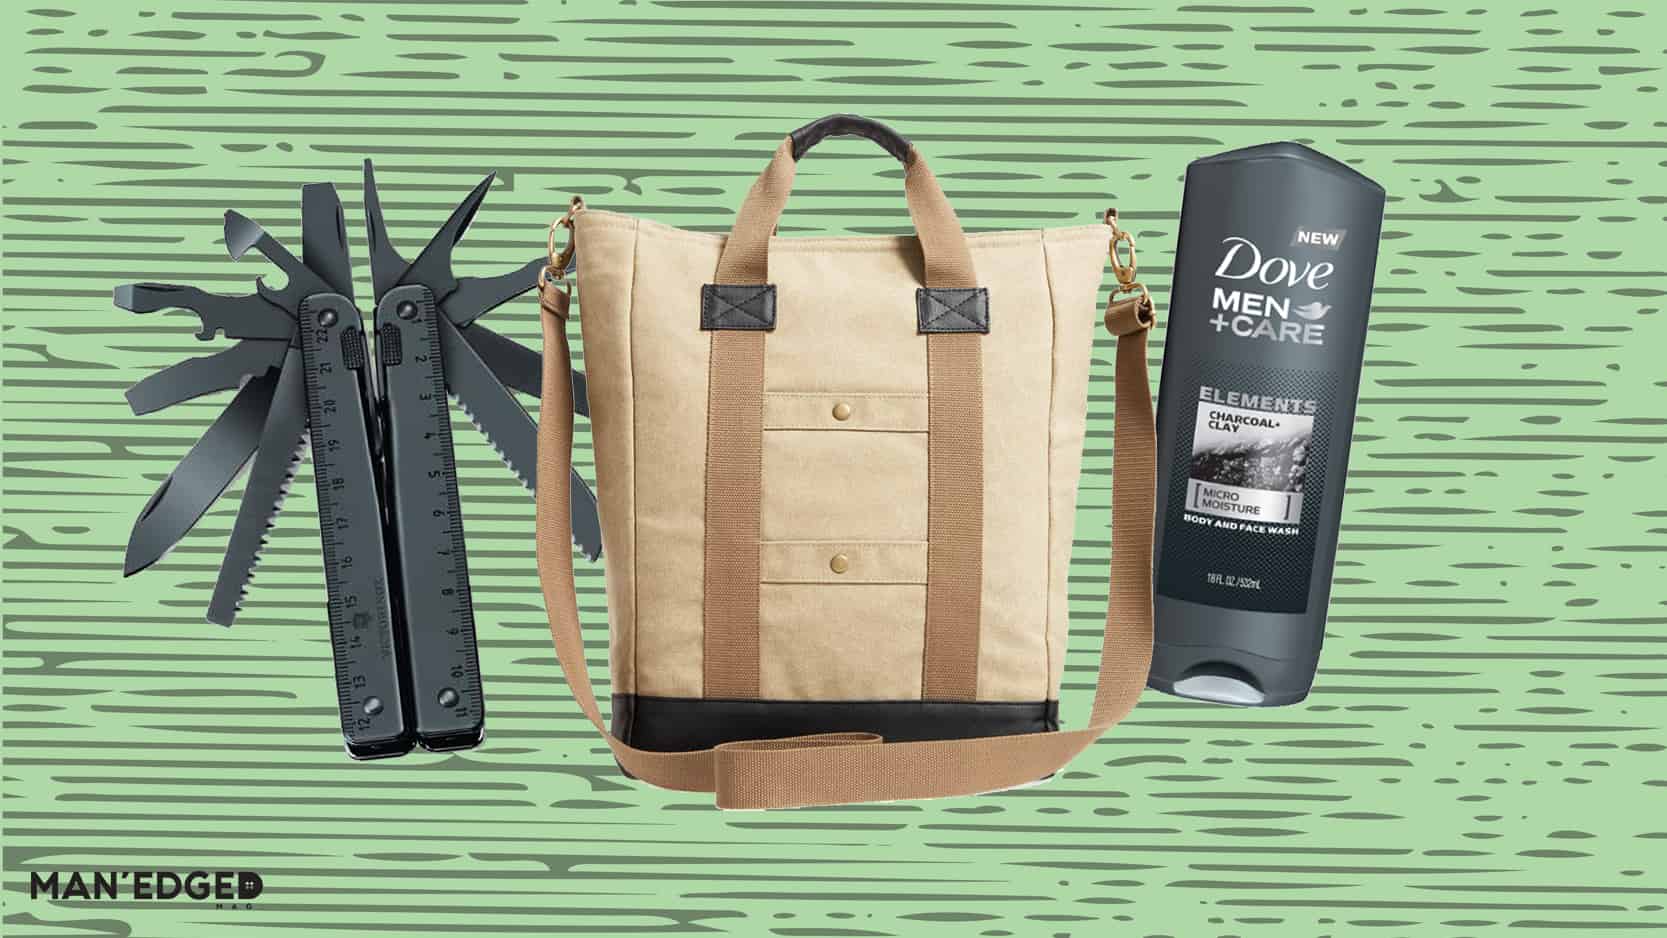 The Outdoorsman gift guide by MAN'edged Magazine